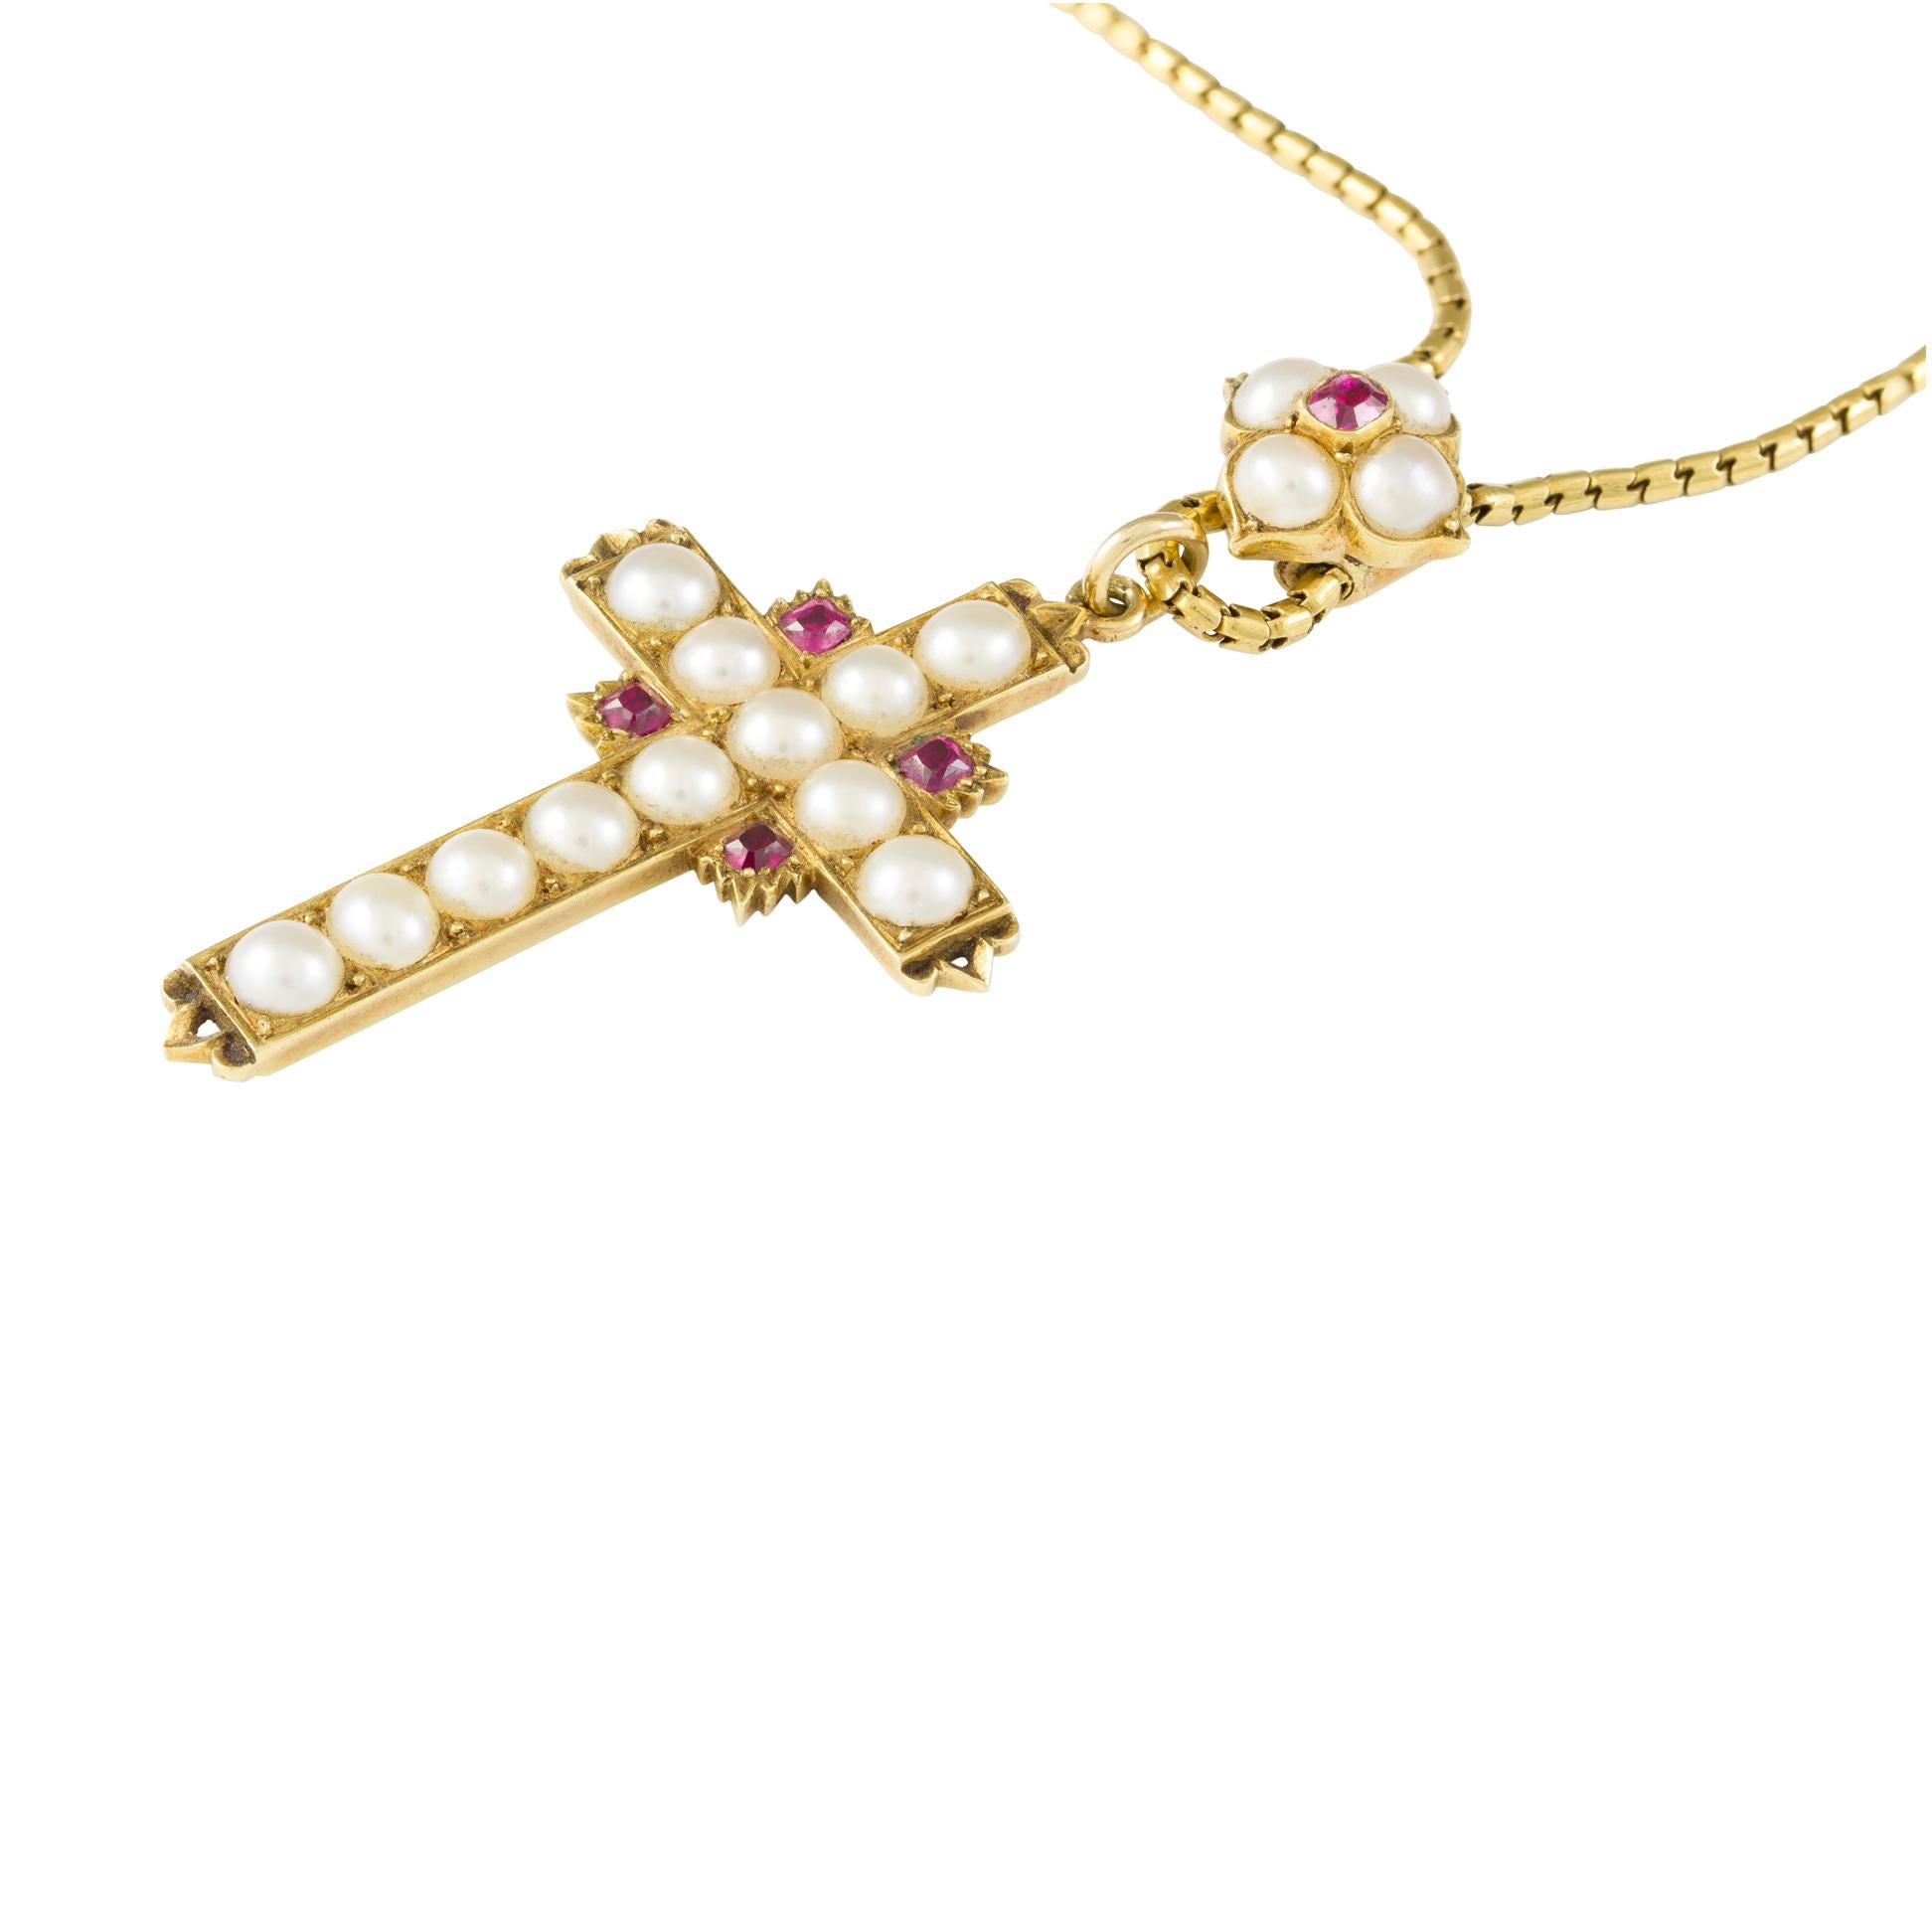 A Victorian pearl and ruby cross, the body and the arms set with twelve half pearls embellished with four rubies, on chain with pearl and ruby flower slide, all mounted in yellow gold, circa 1880, the cross measuring approximately 2.7 x 2.4cm, the